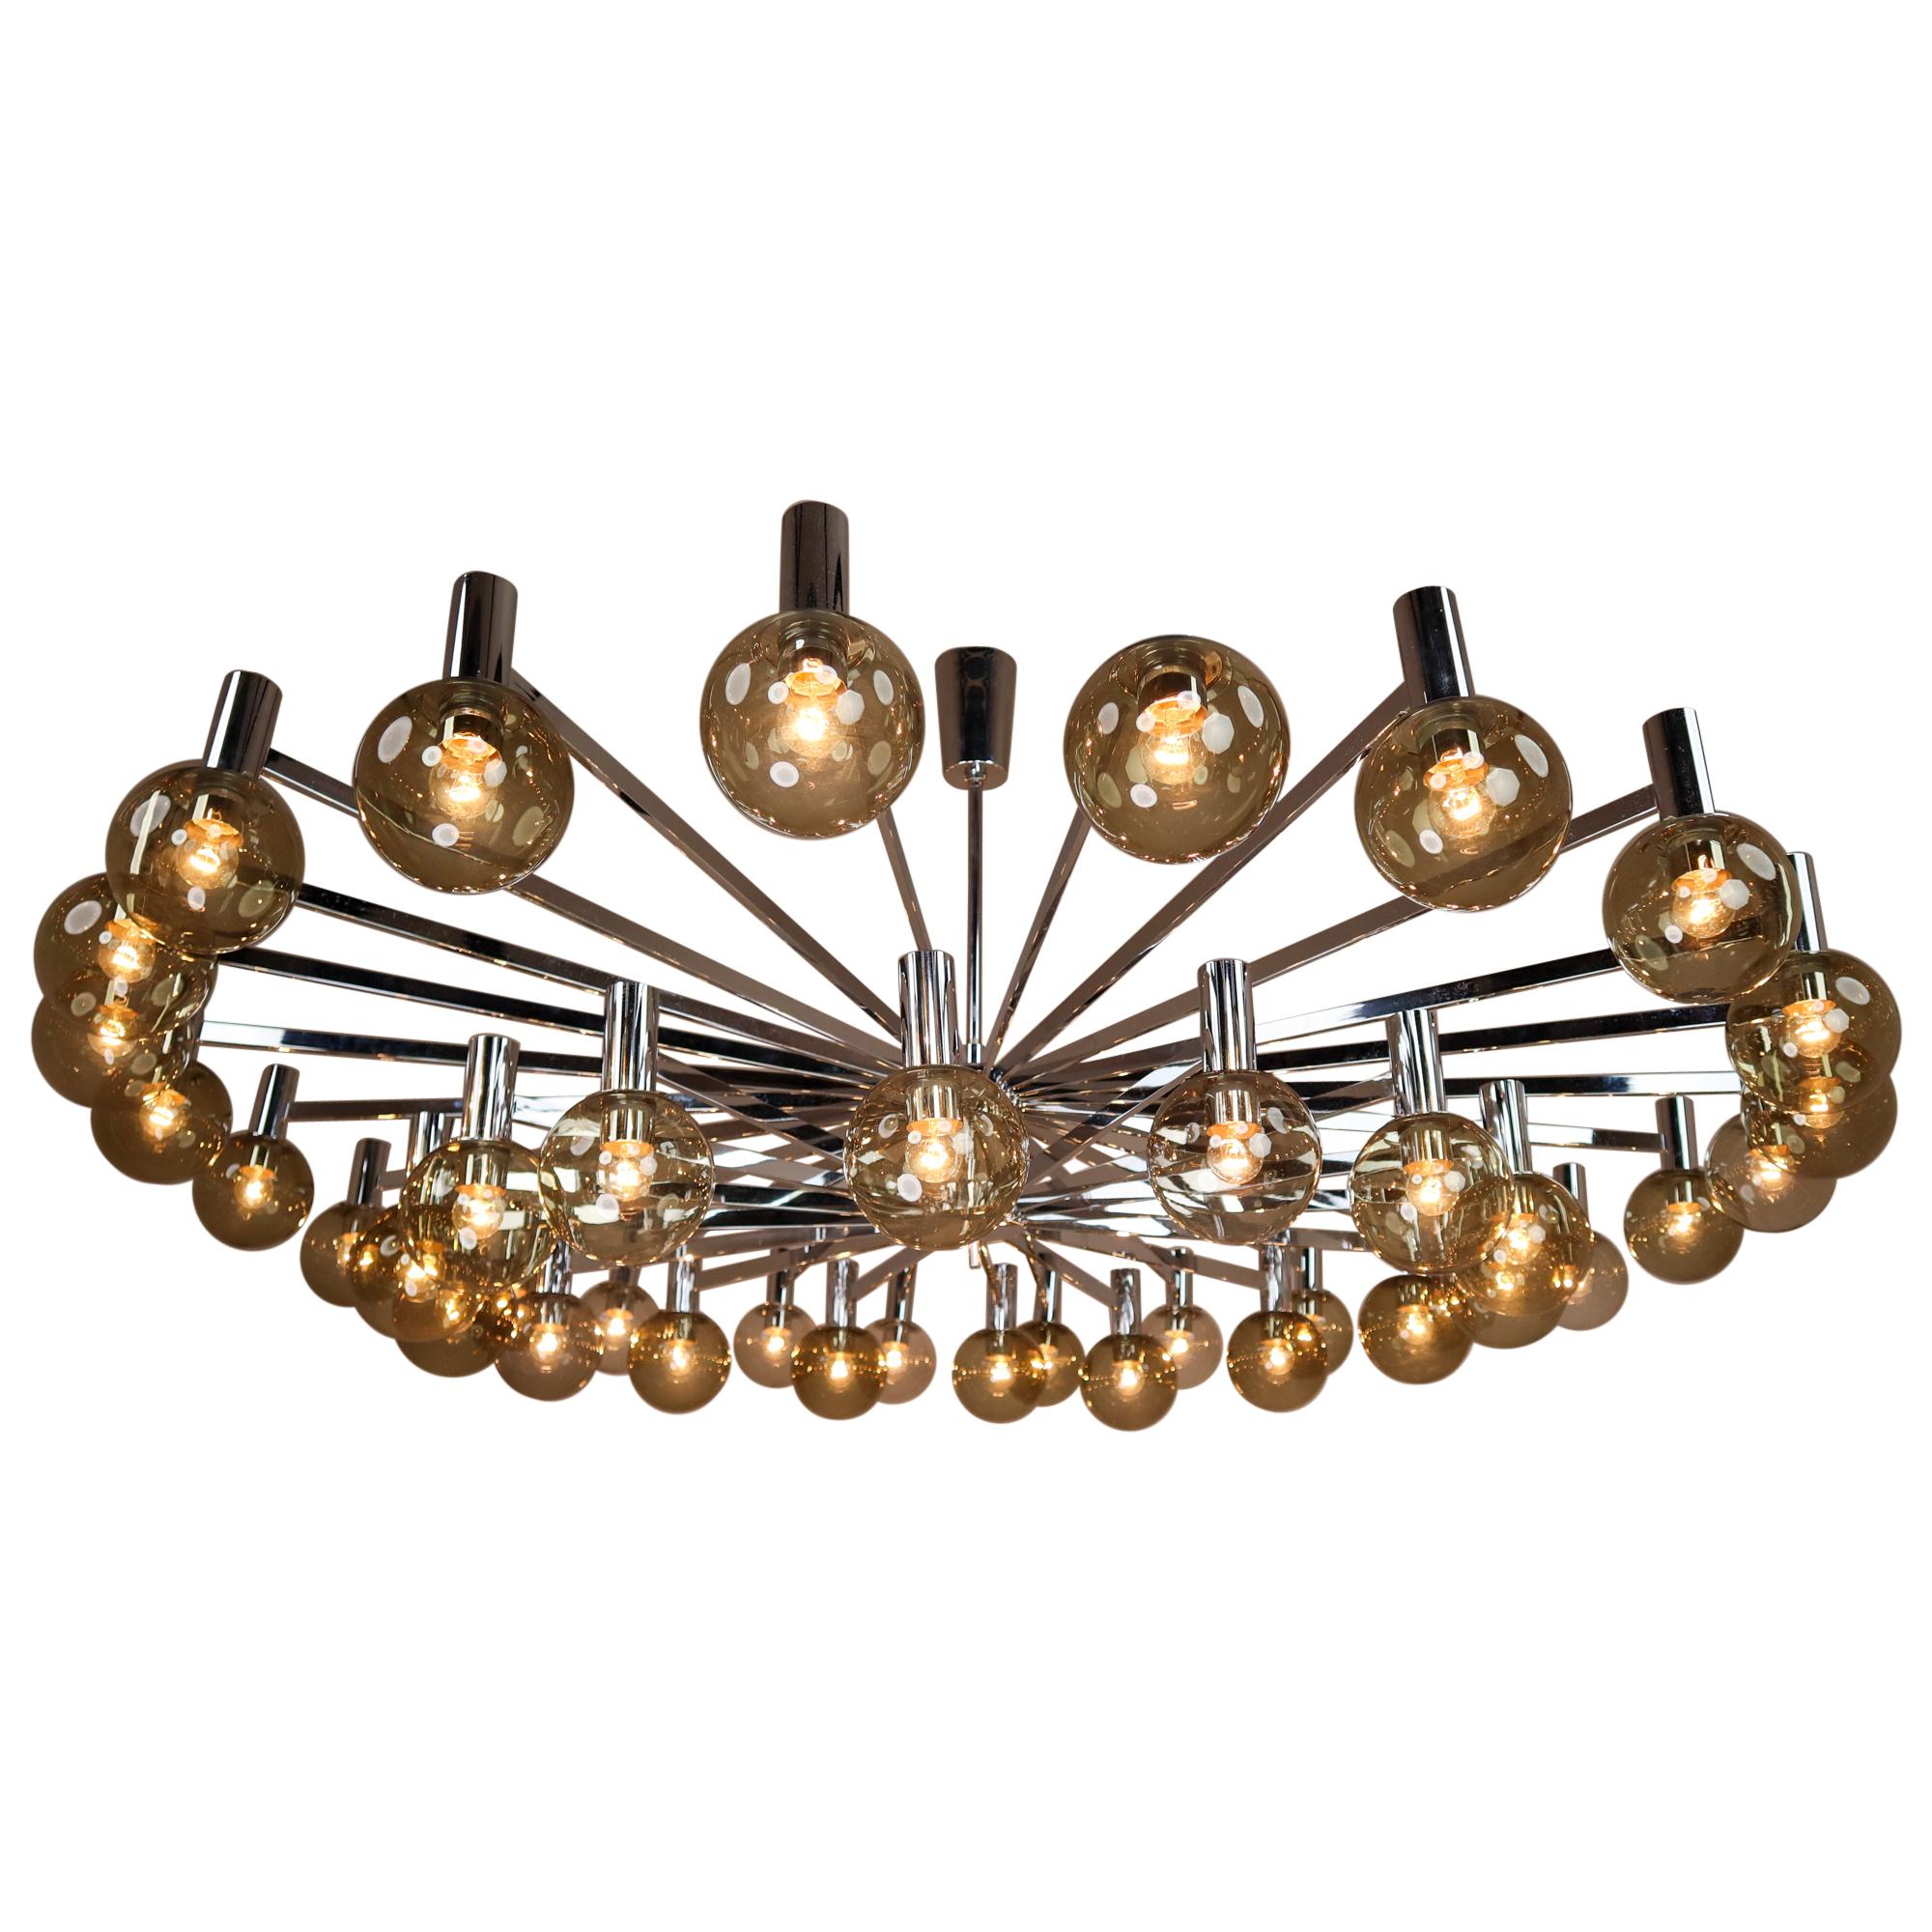 XXL Large Mid-Century Modern Chrome and Glass Chandelier, Italy, 1970s